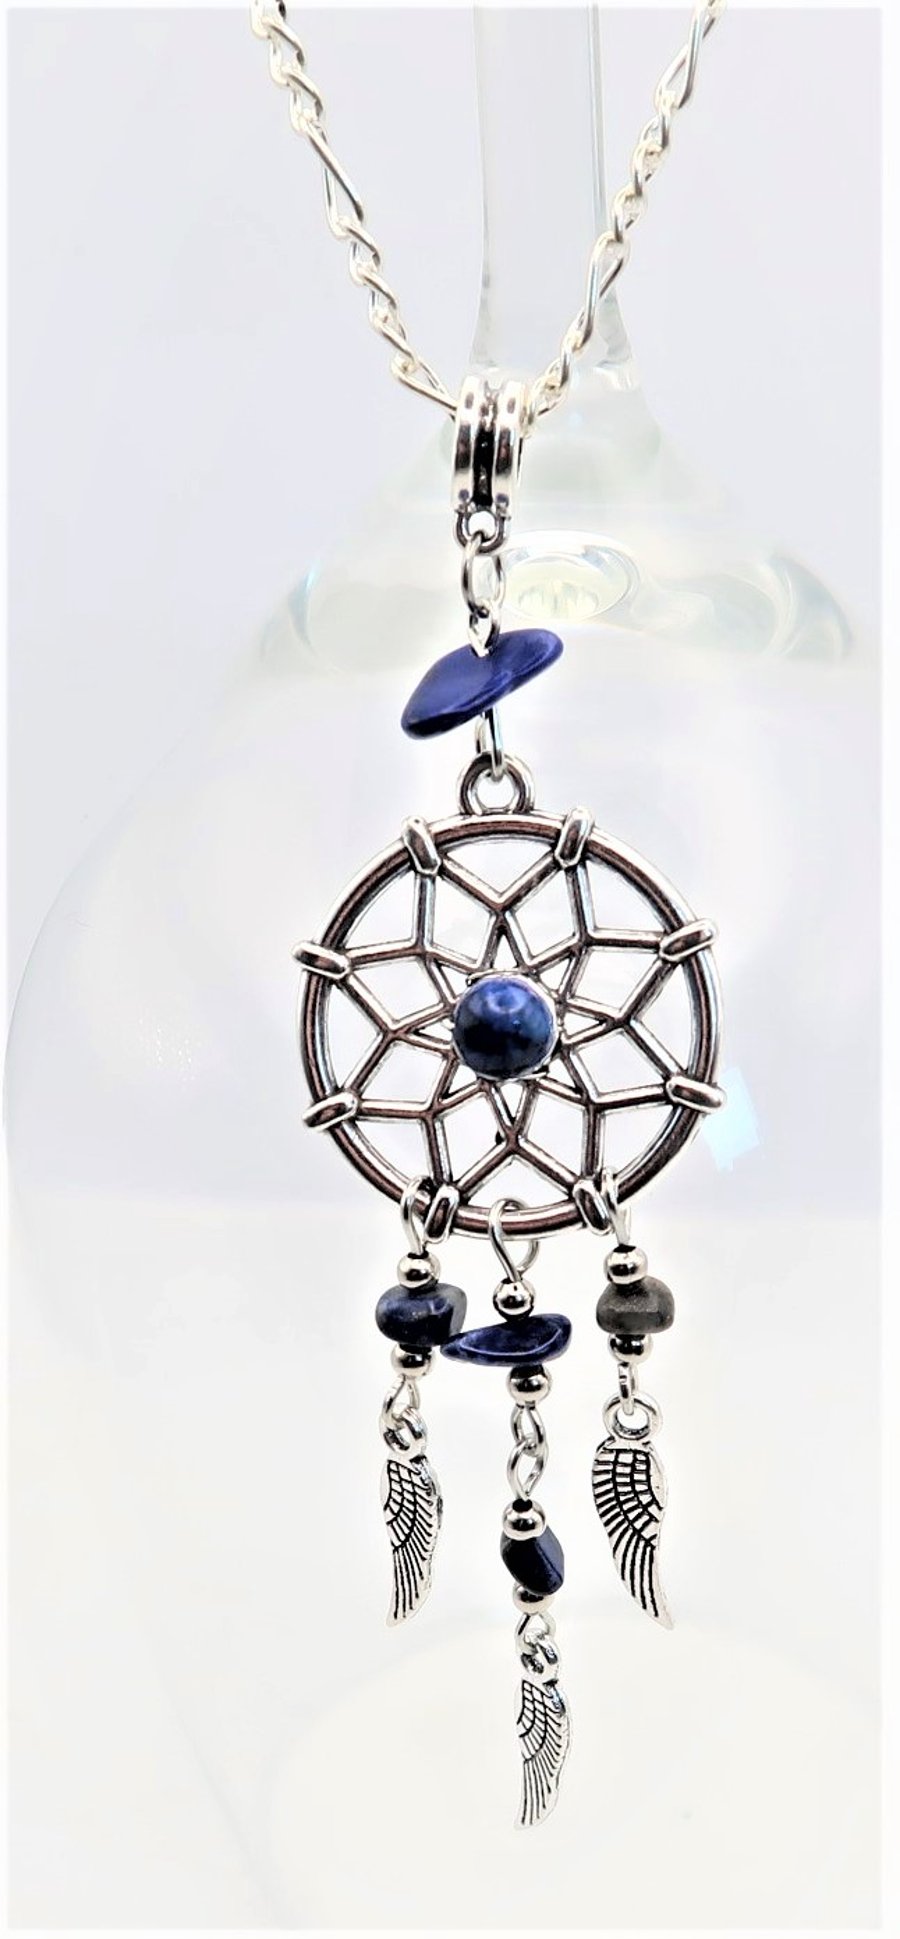 Lapis Lazuli Dreamcatcher Pendant on Silver Chain. Protects from Negative Energy